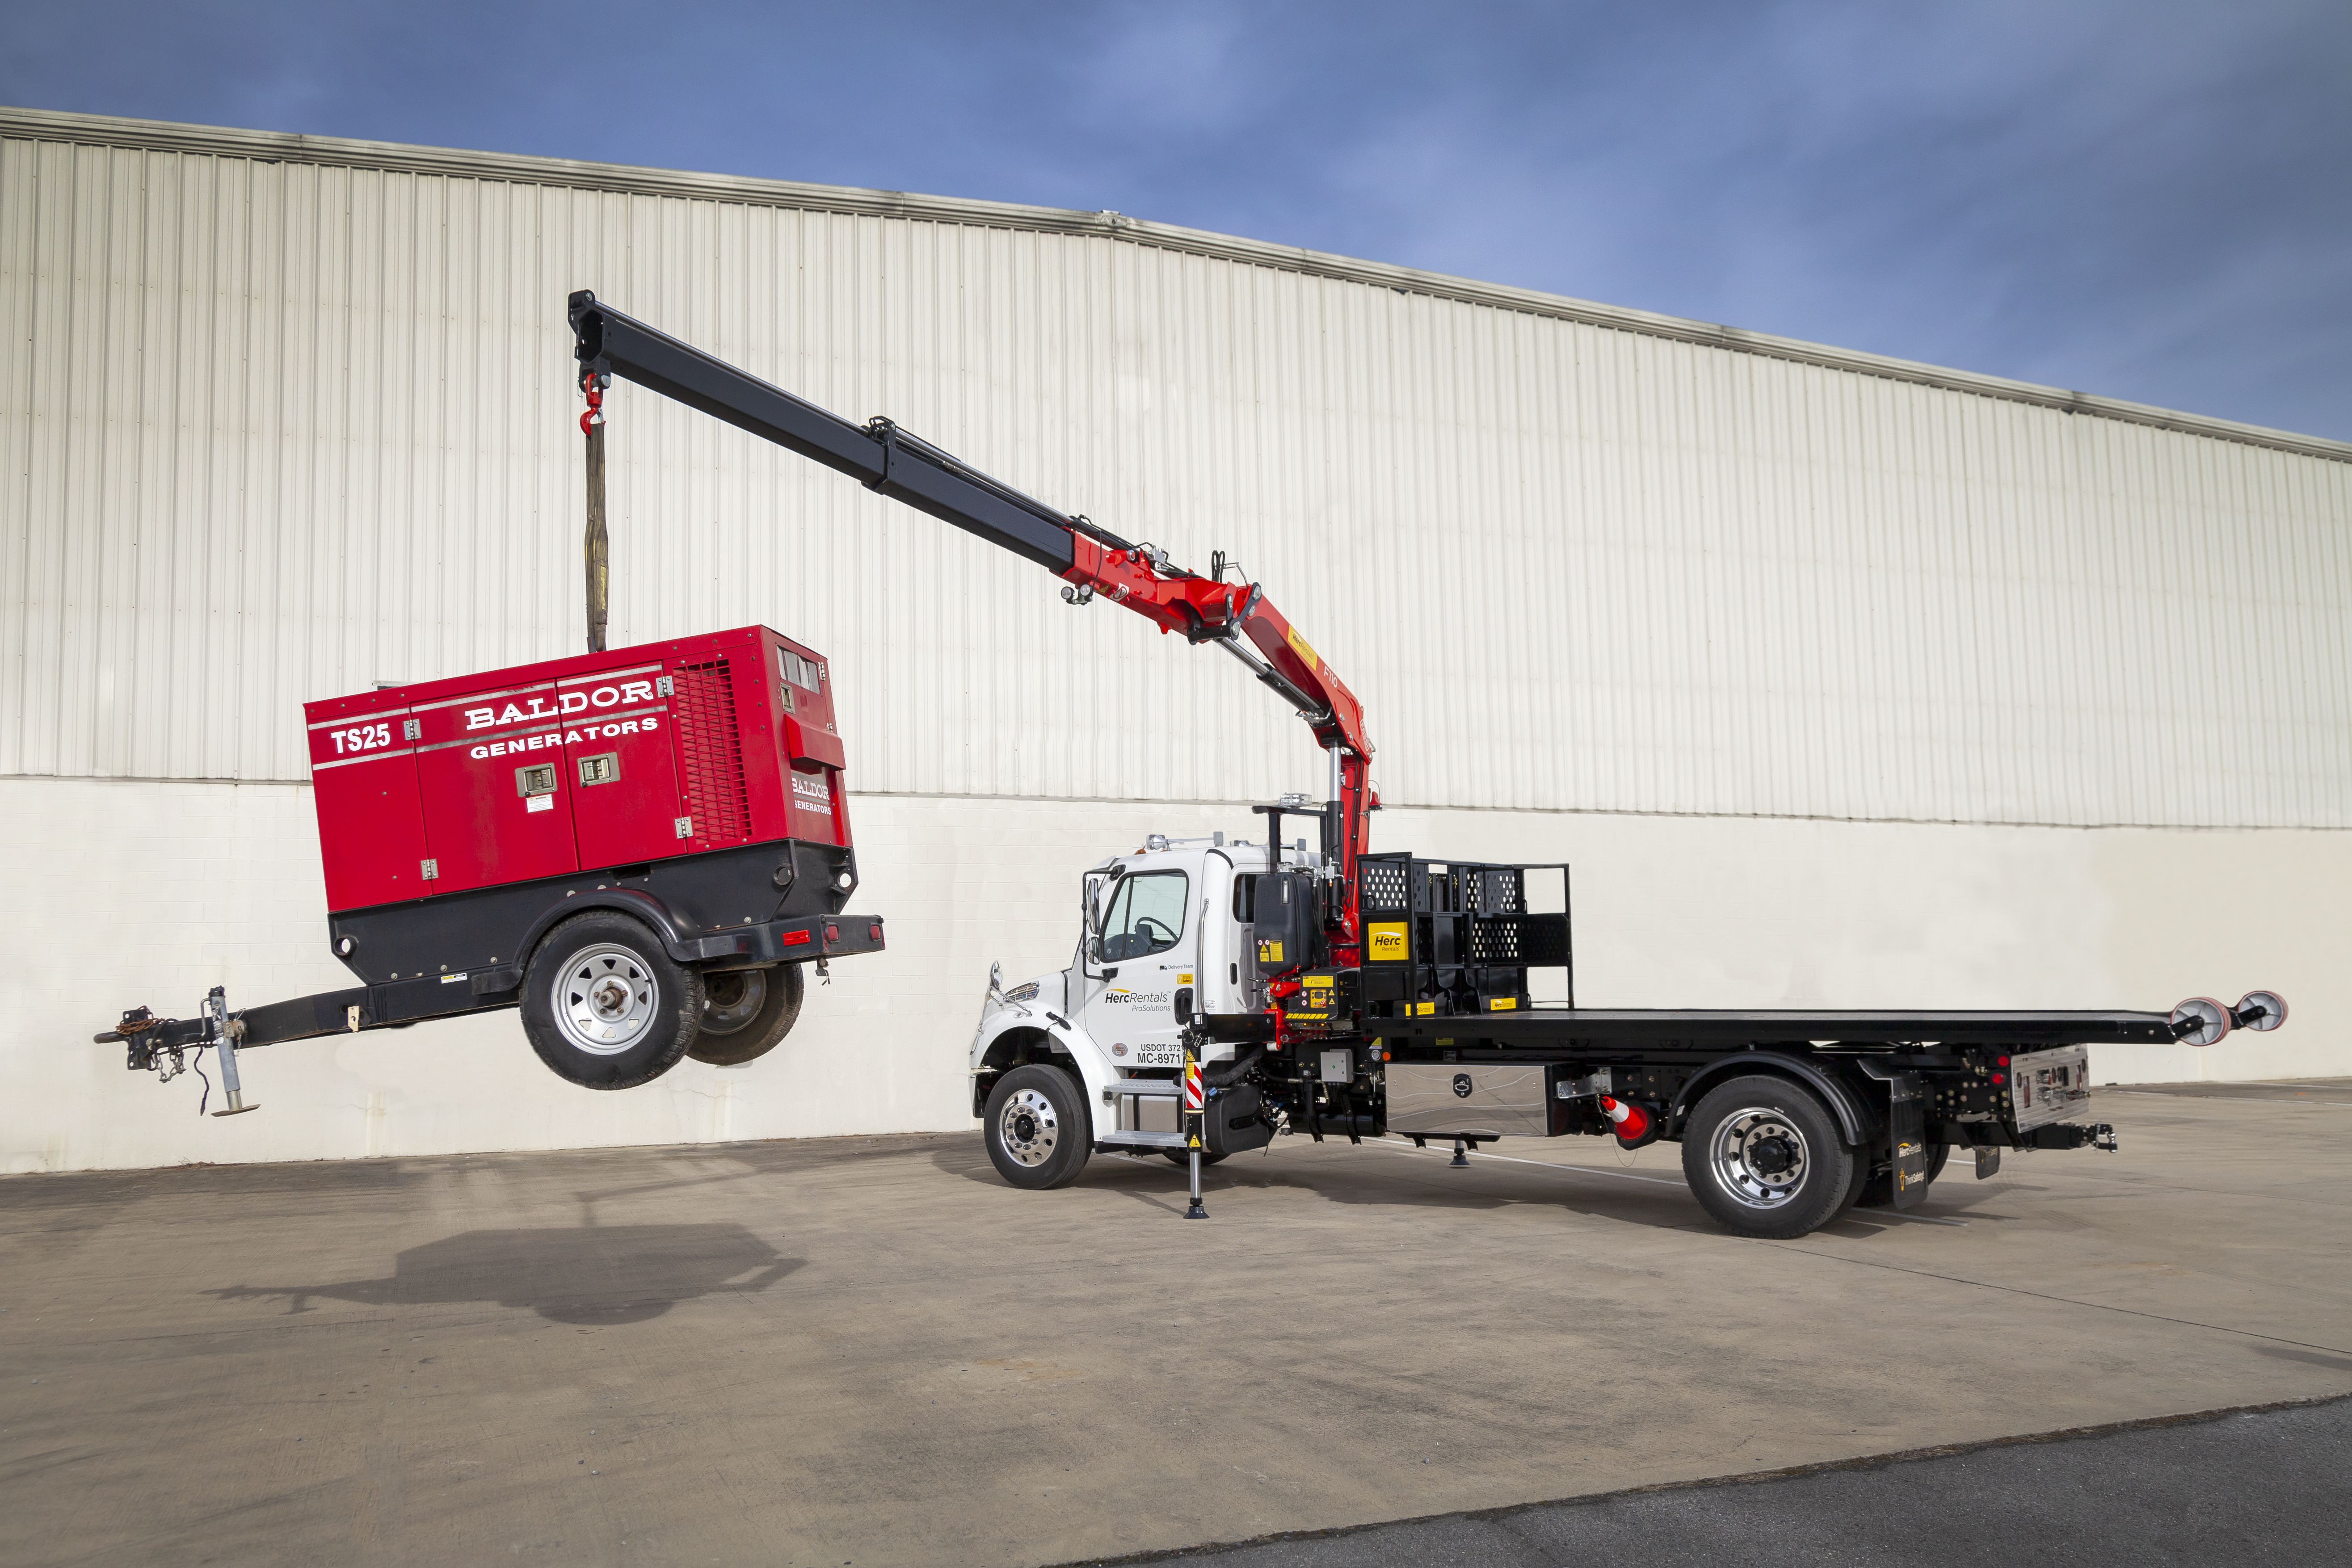 Titan® C-Series can be outfitted with a remote control hydraulic crane